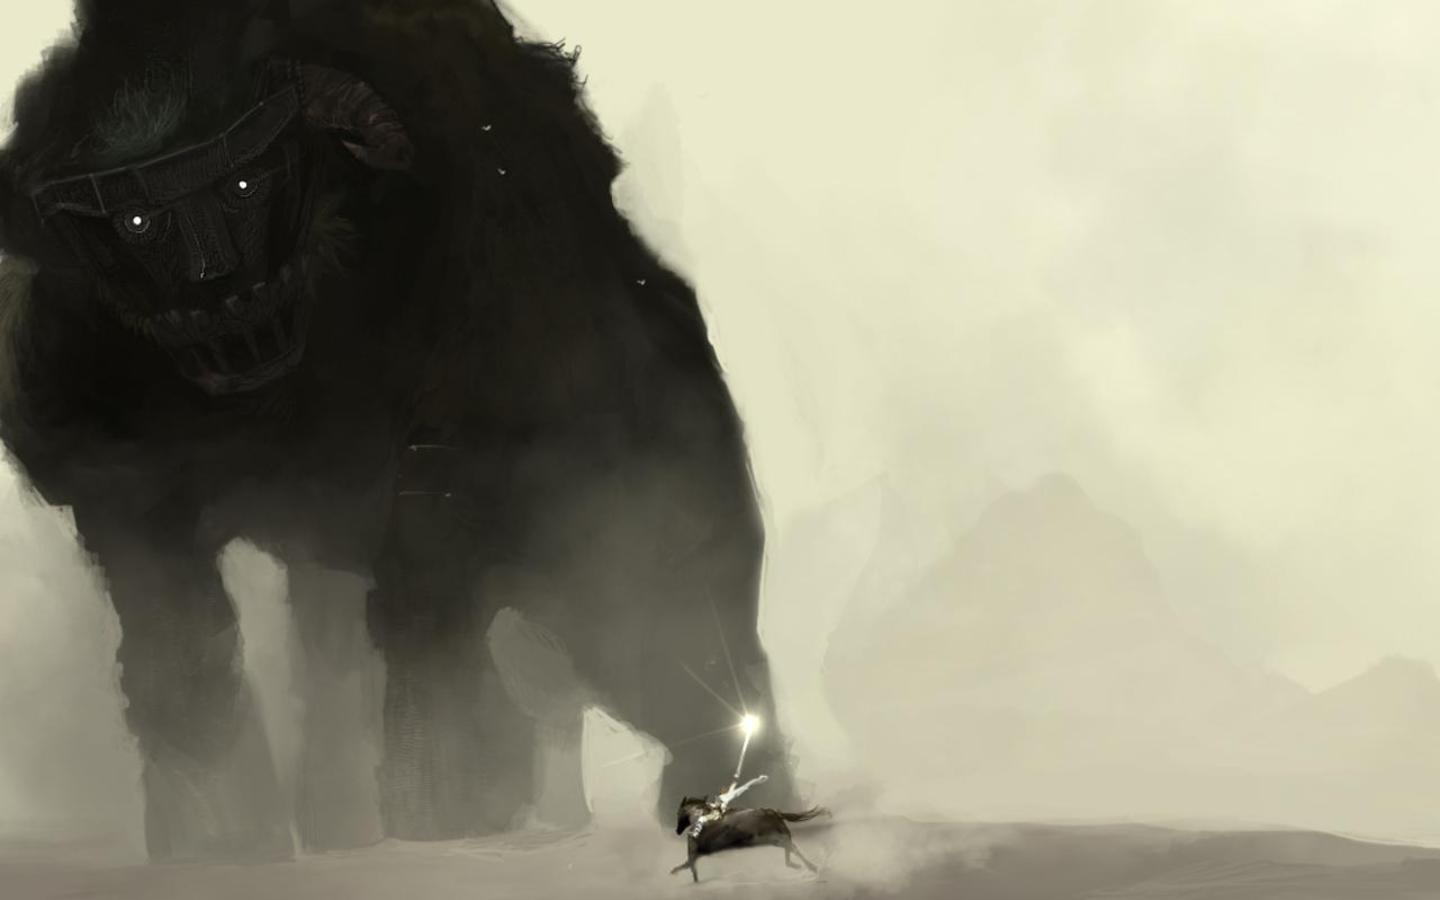 Shadow Of The Colossus wallpapers for desktop, download free Shadow Of The  Colossus pictures and backgrounds for PC